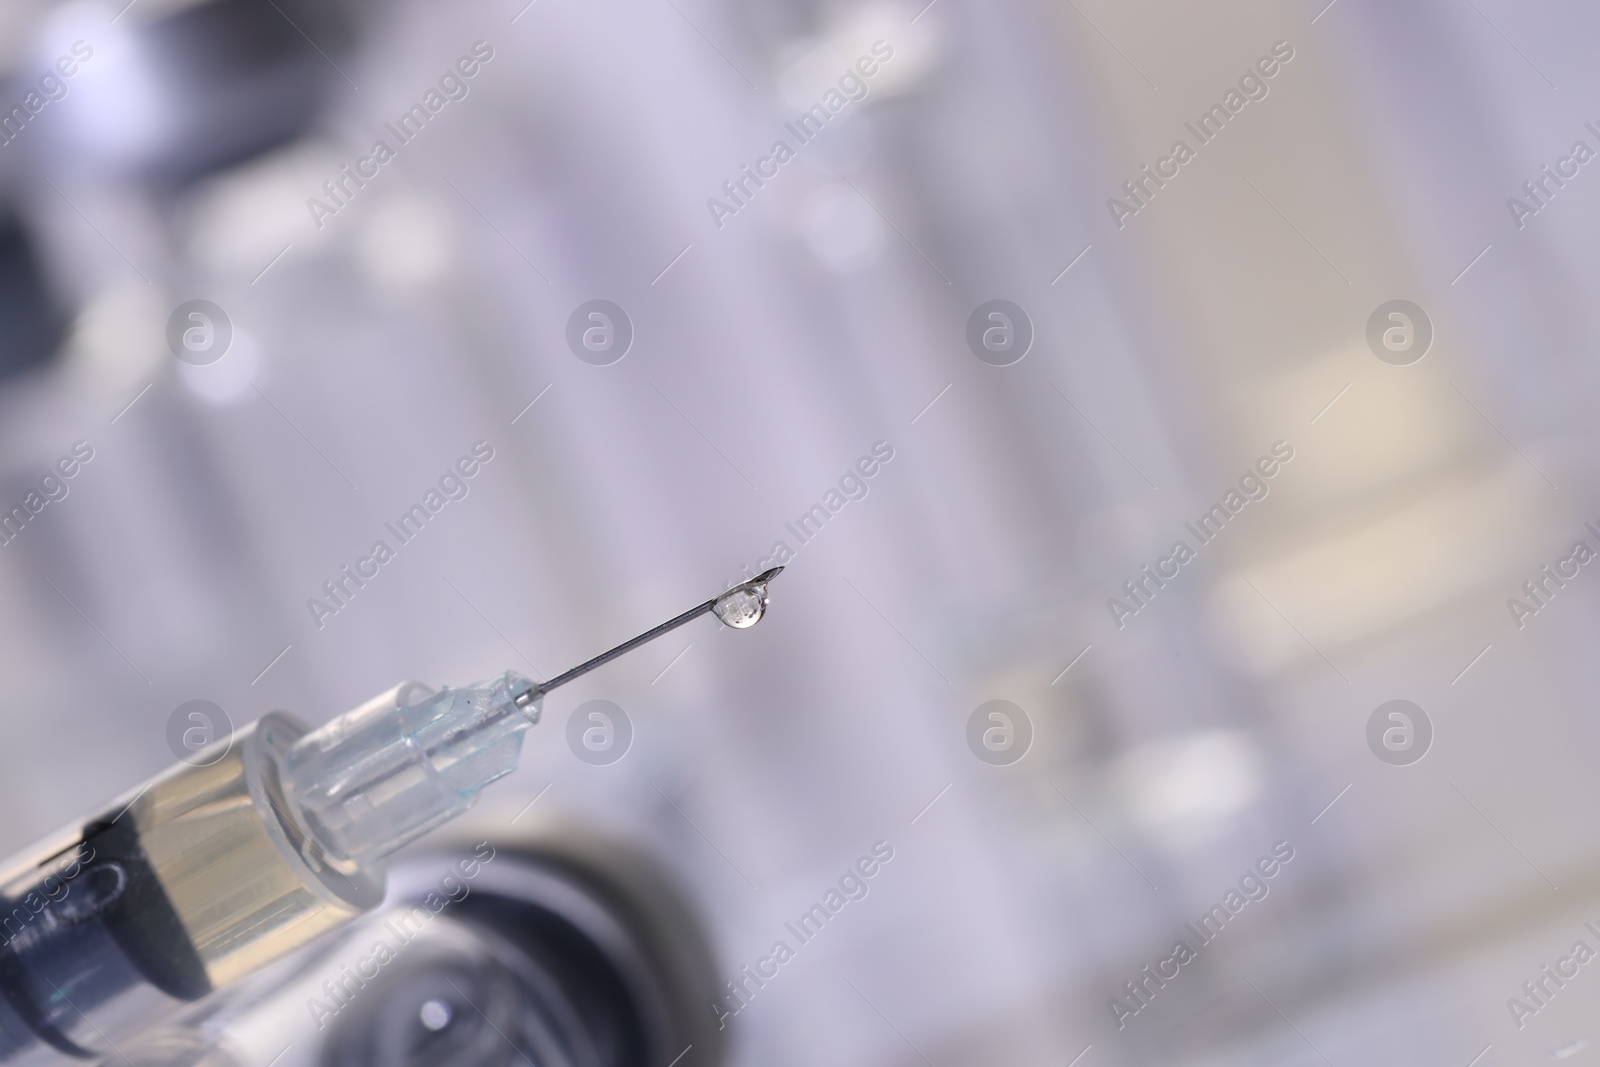 Photo of Drop of medication on syringe needle against blurred background, closeup. Space for text